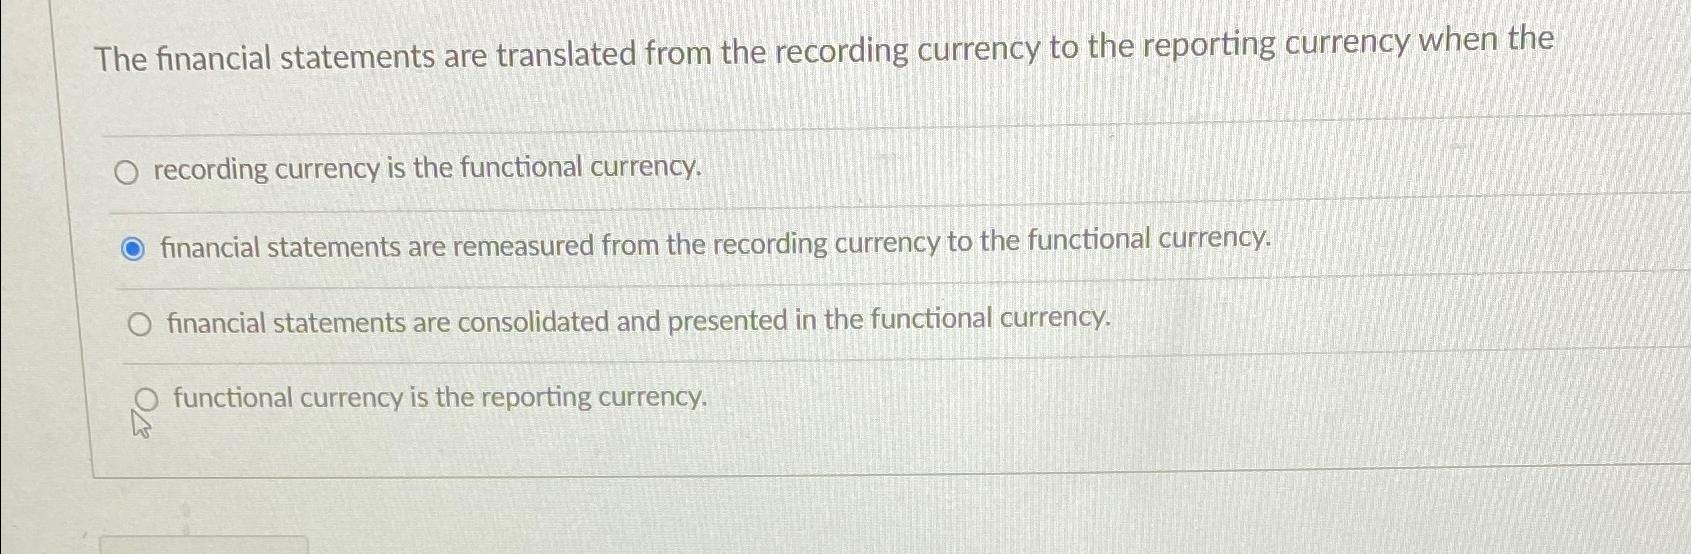 The financial statements are translated from the recording currency to the reporting currency when the O